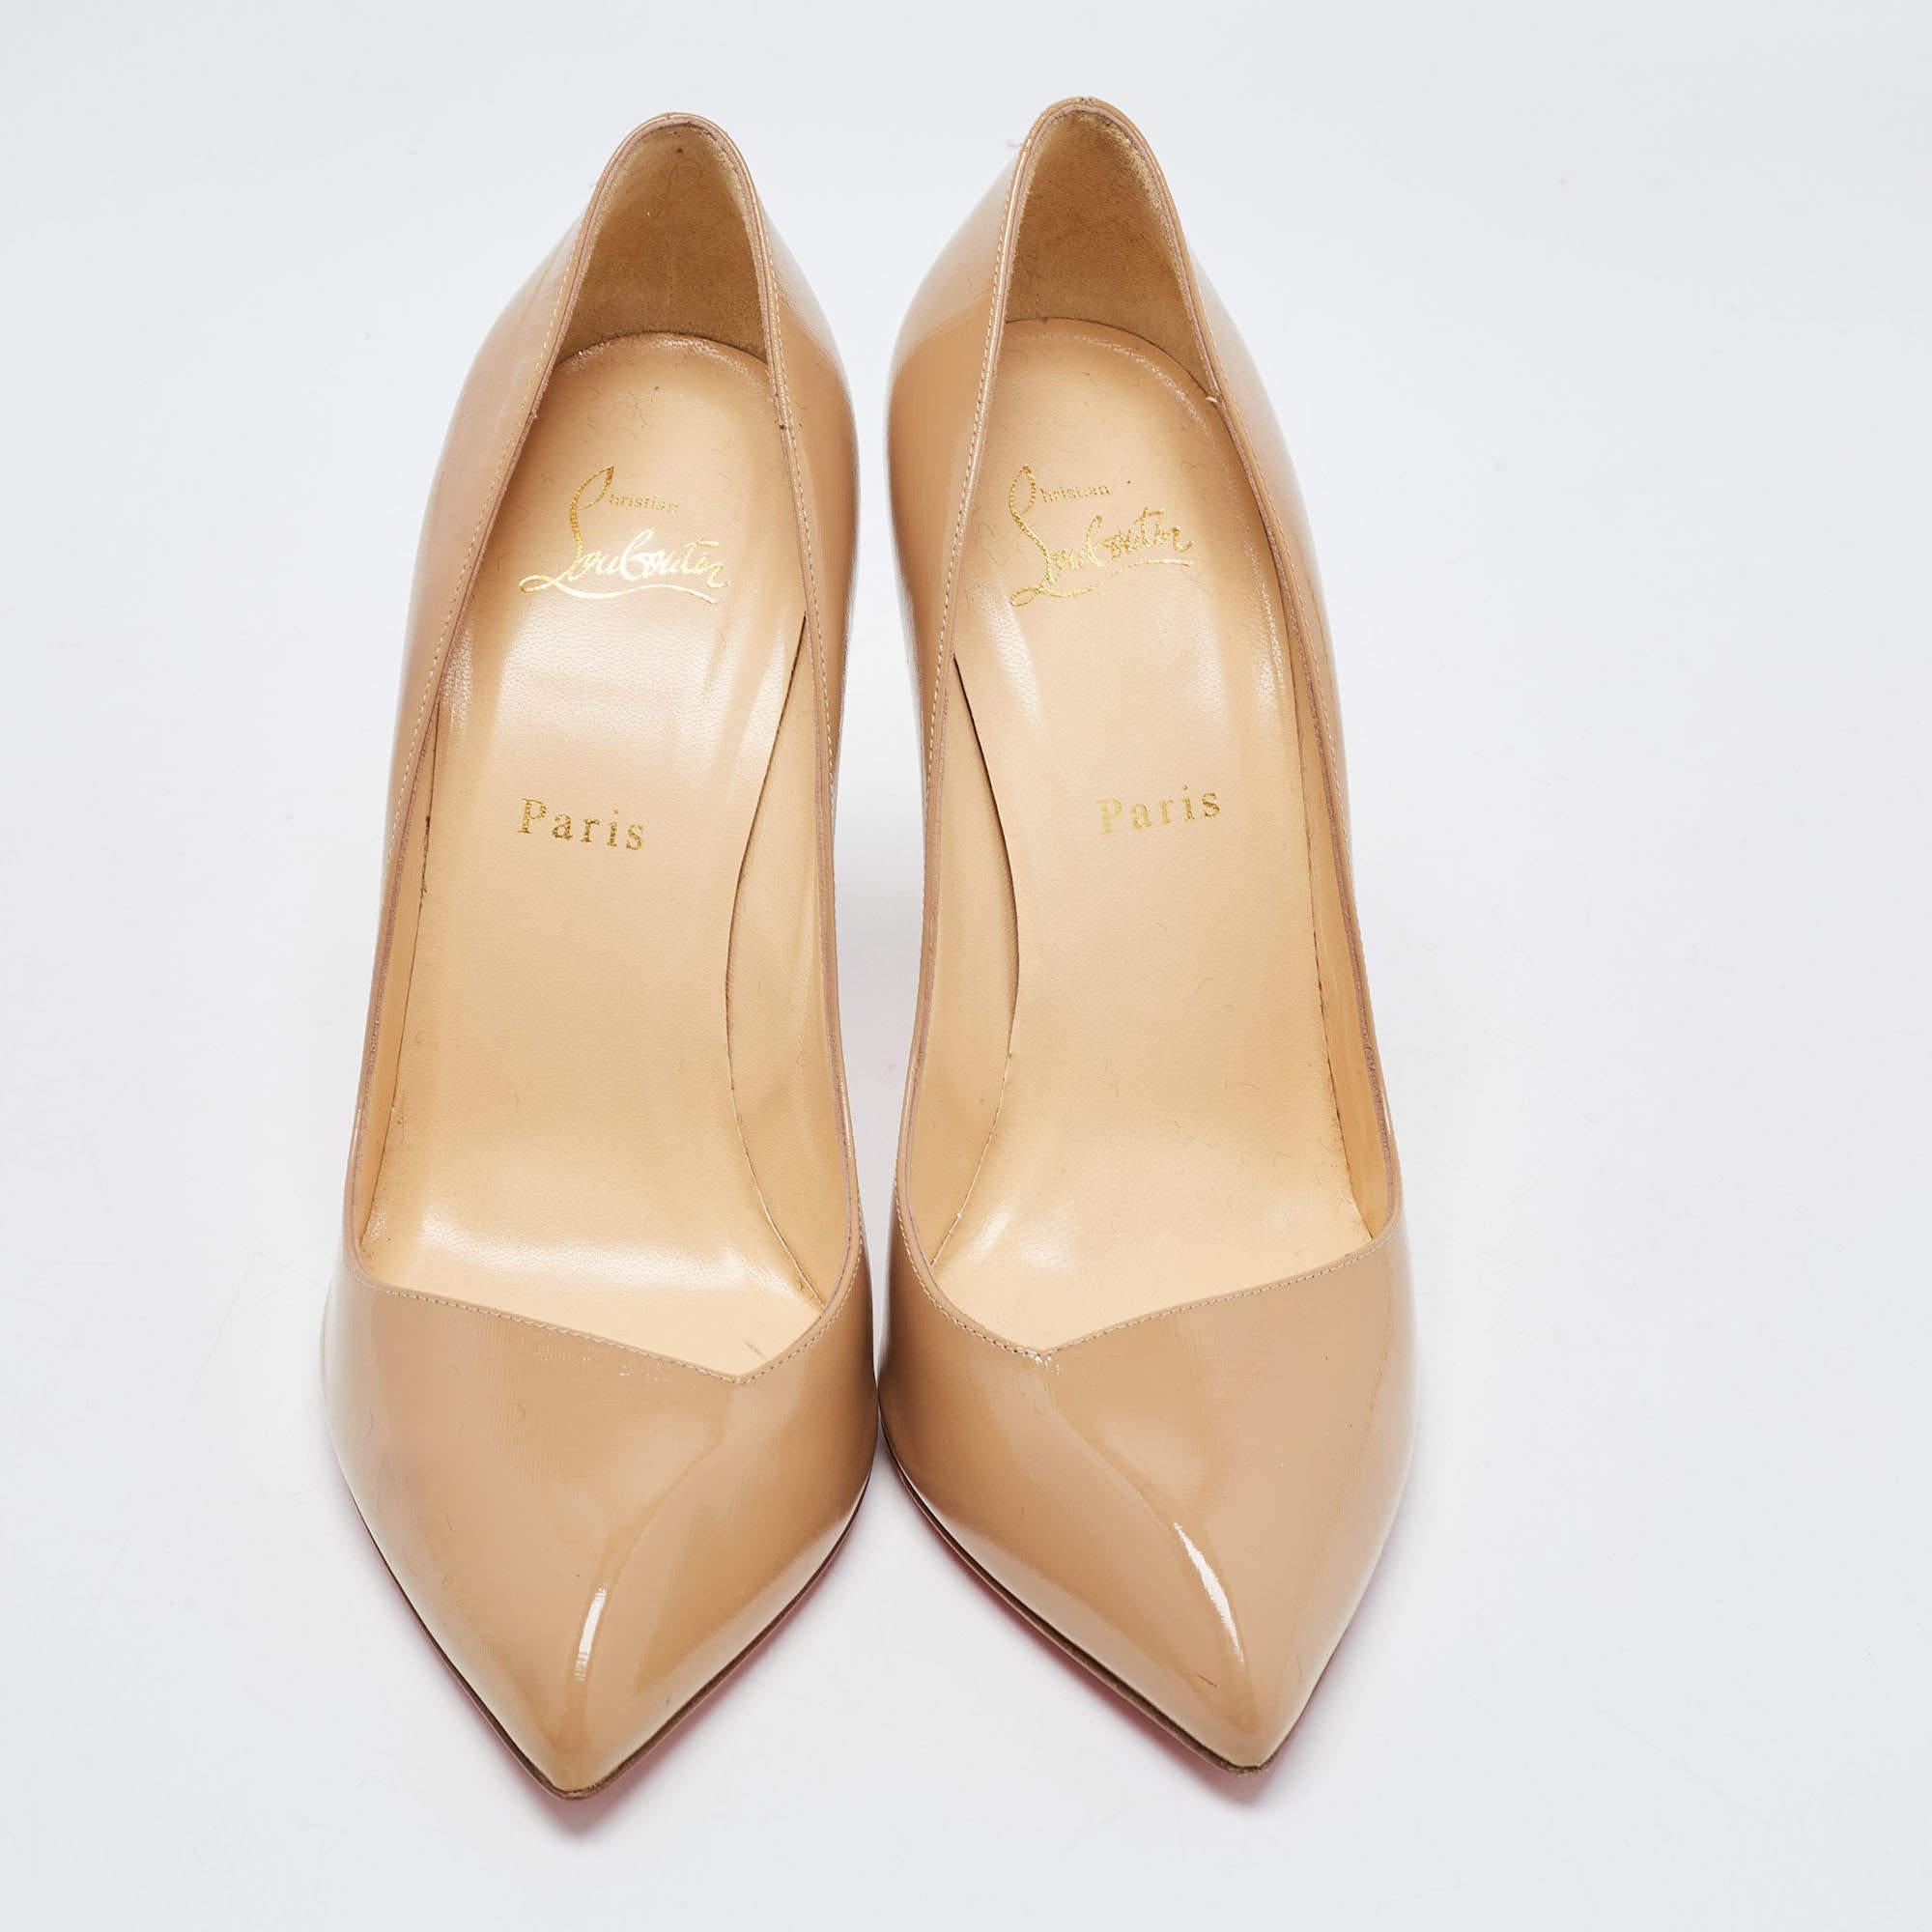 Make a chic style statement with these Christian Louboutin beige pumps. They showcase sturdy heels and durable soles, perfect for your fashionable outings!

